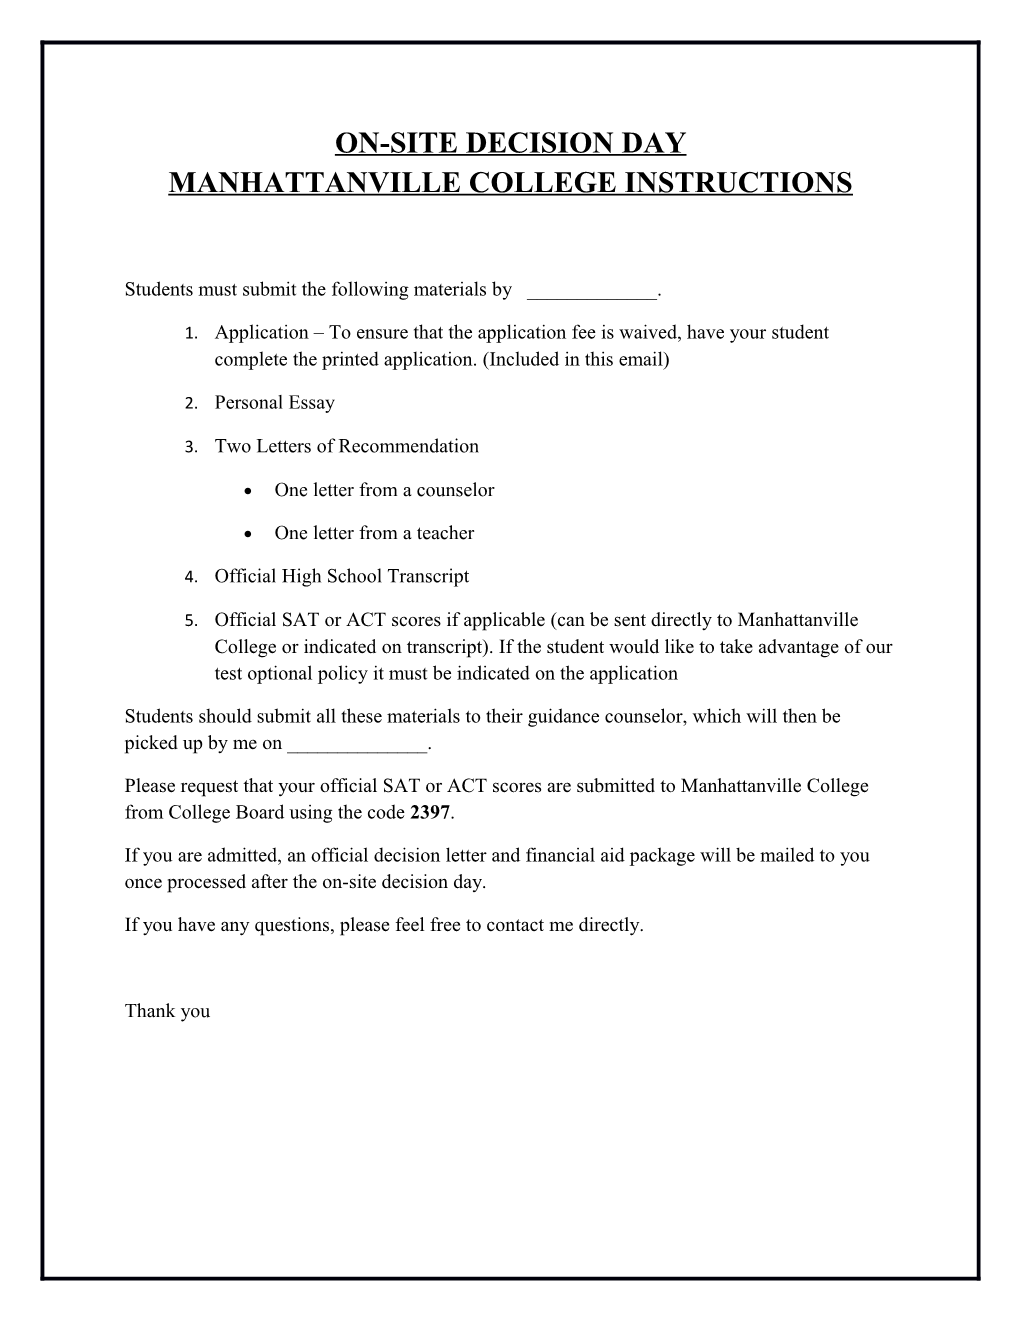 On-Site Decision Day Manhattanville College Instructions